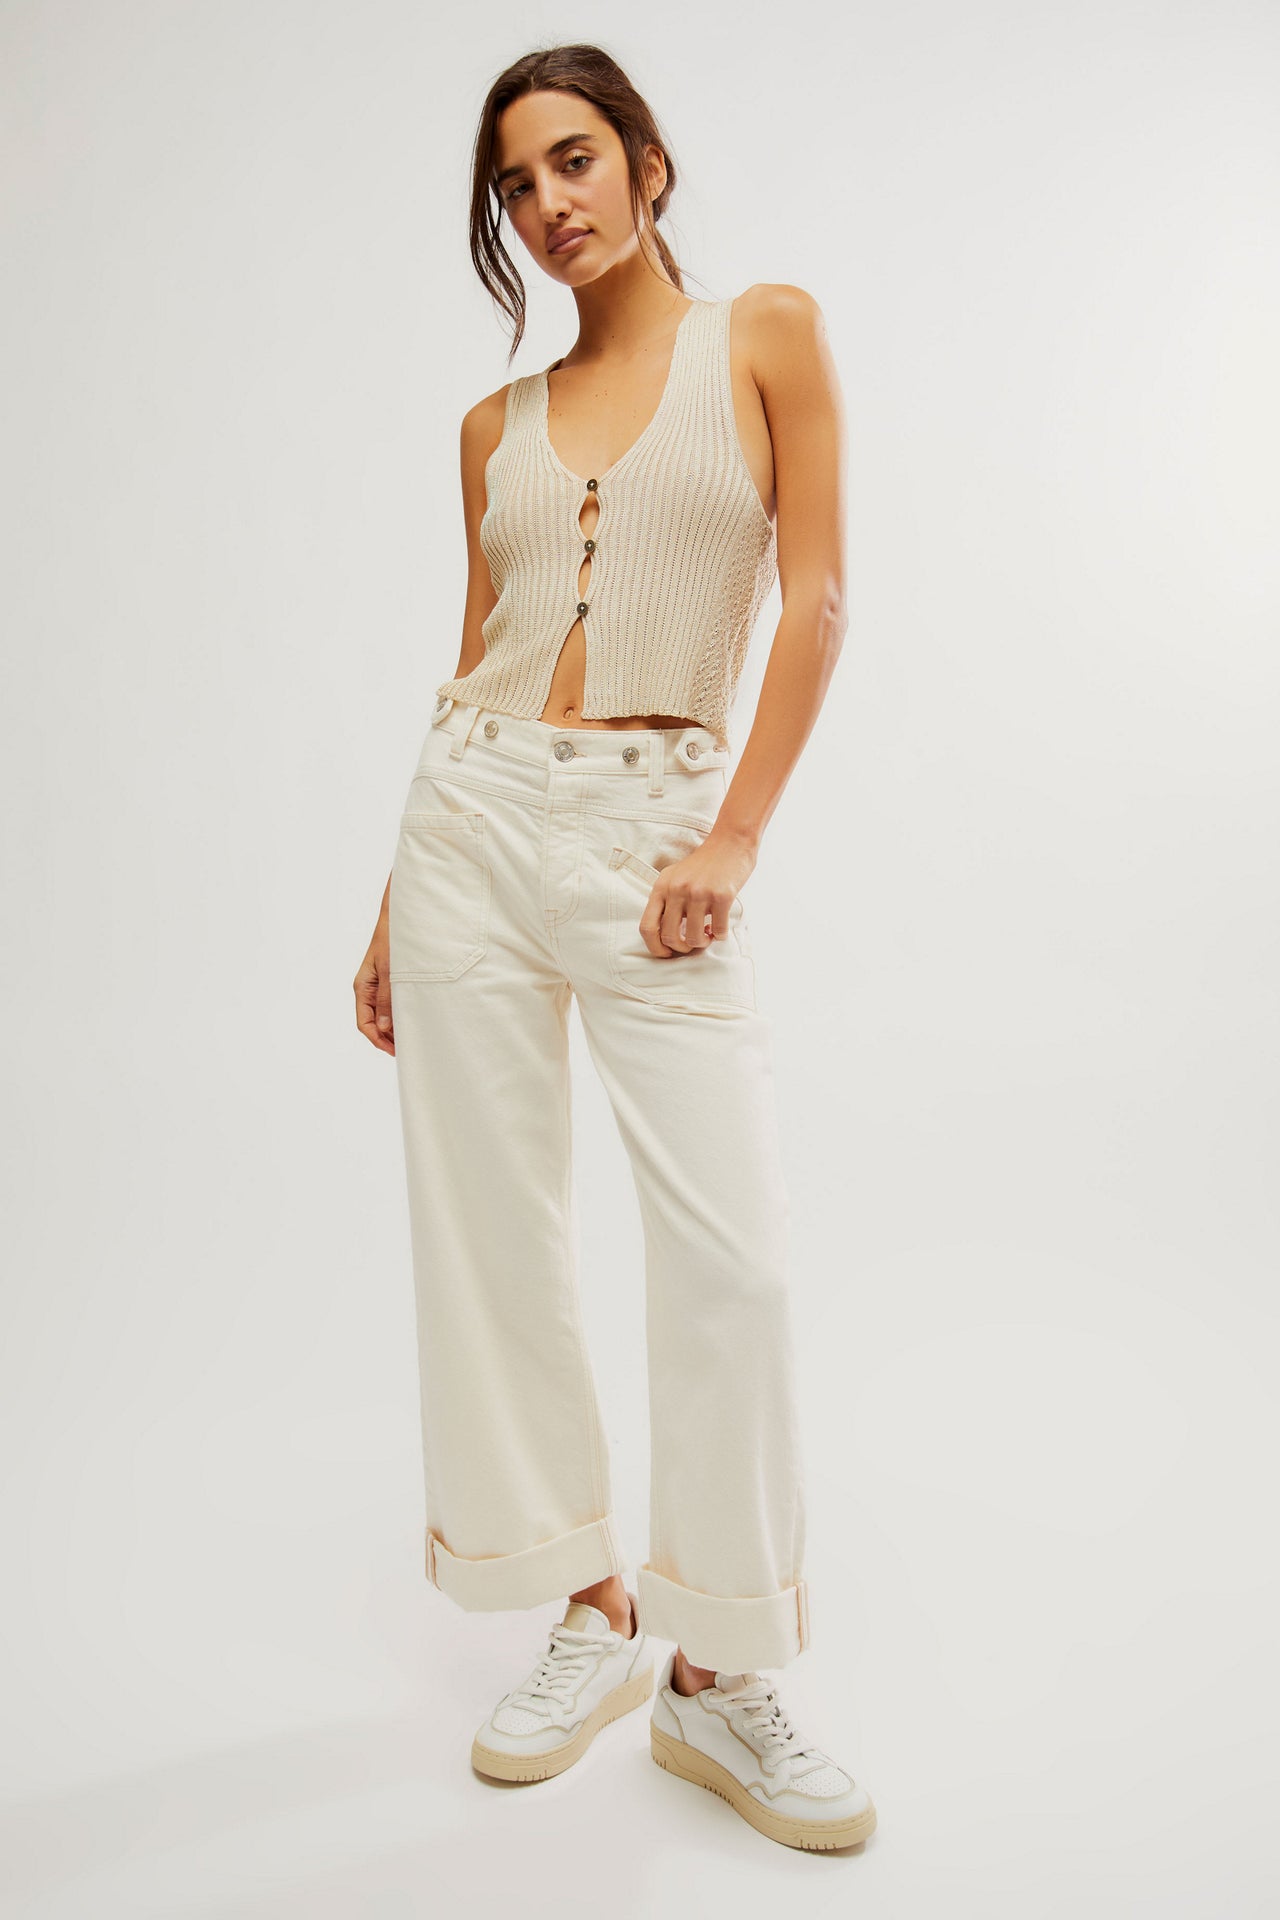 Palmer Cuffed Jean Eggshell, Flare Denim by Free People | LIT Boutique